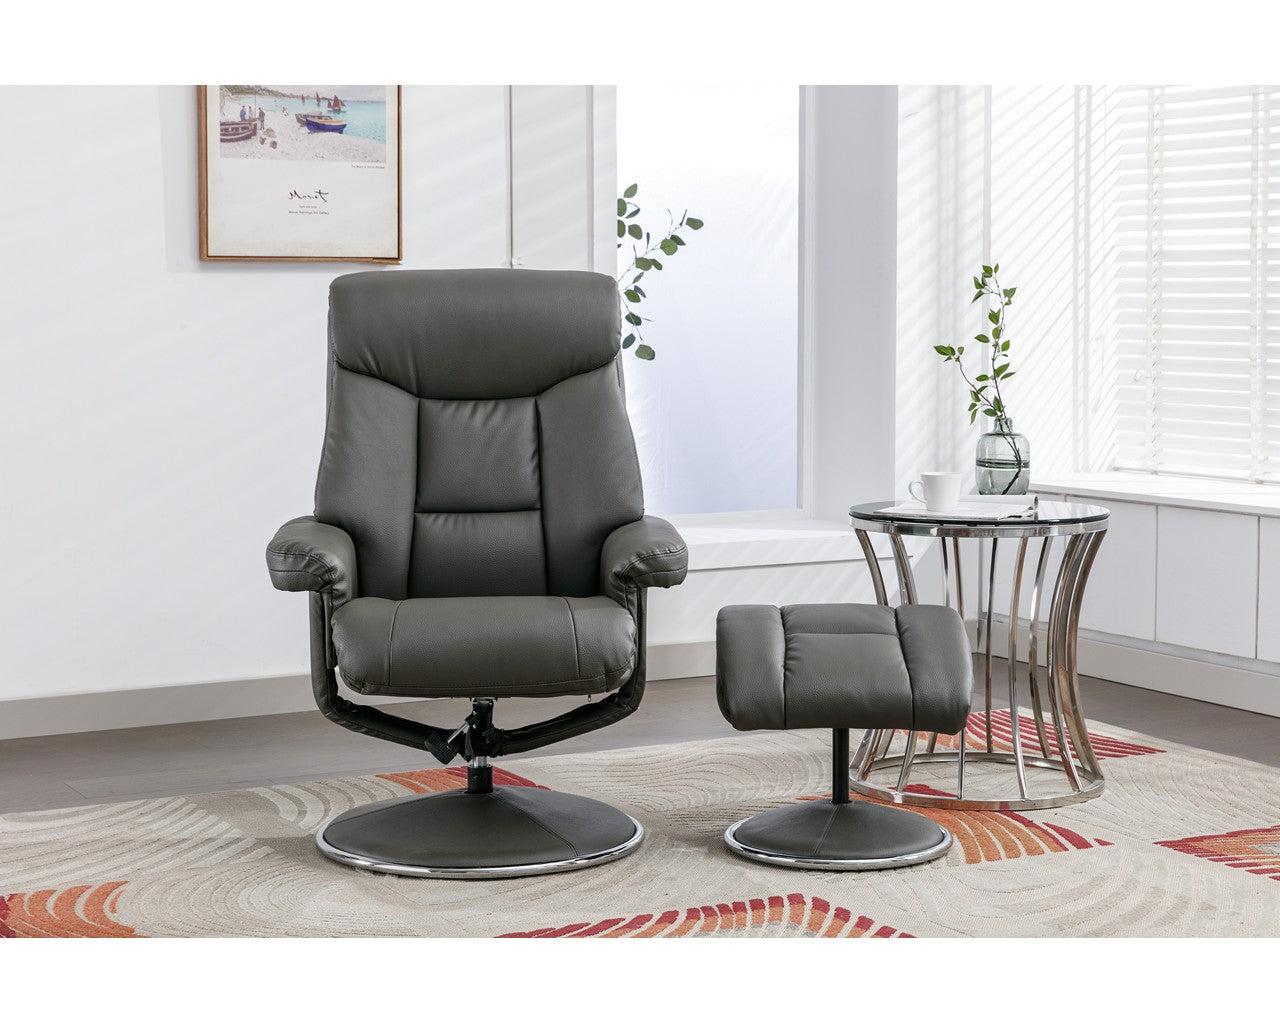 Swivel Recliner Chair Collection - Biarritz: Cinder Plush